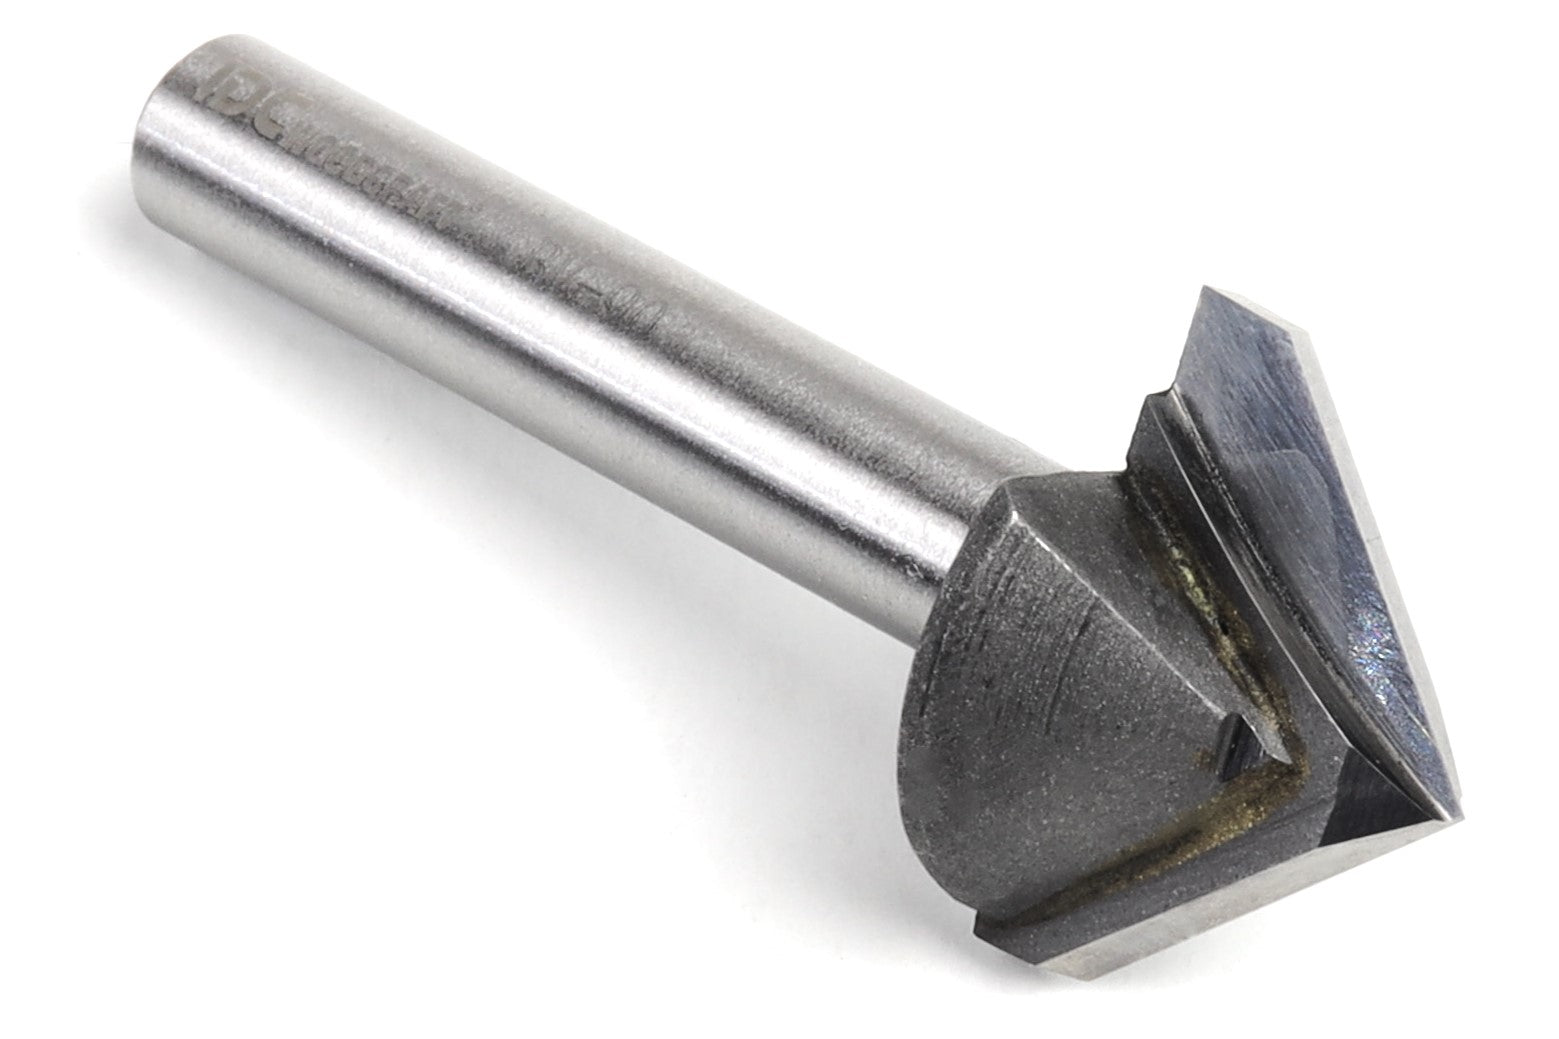 90 Degree V Grooving Bit for CNC Routers, 1/4 Shank